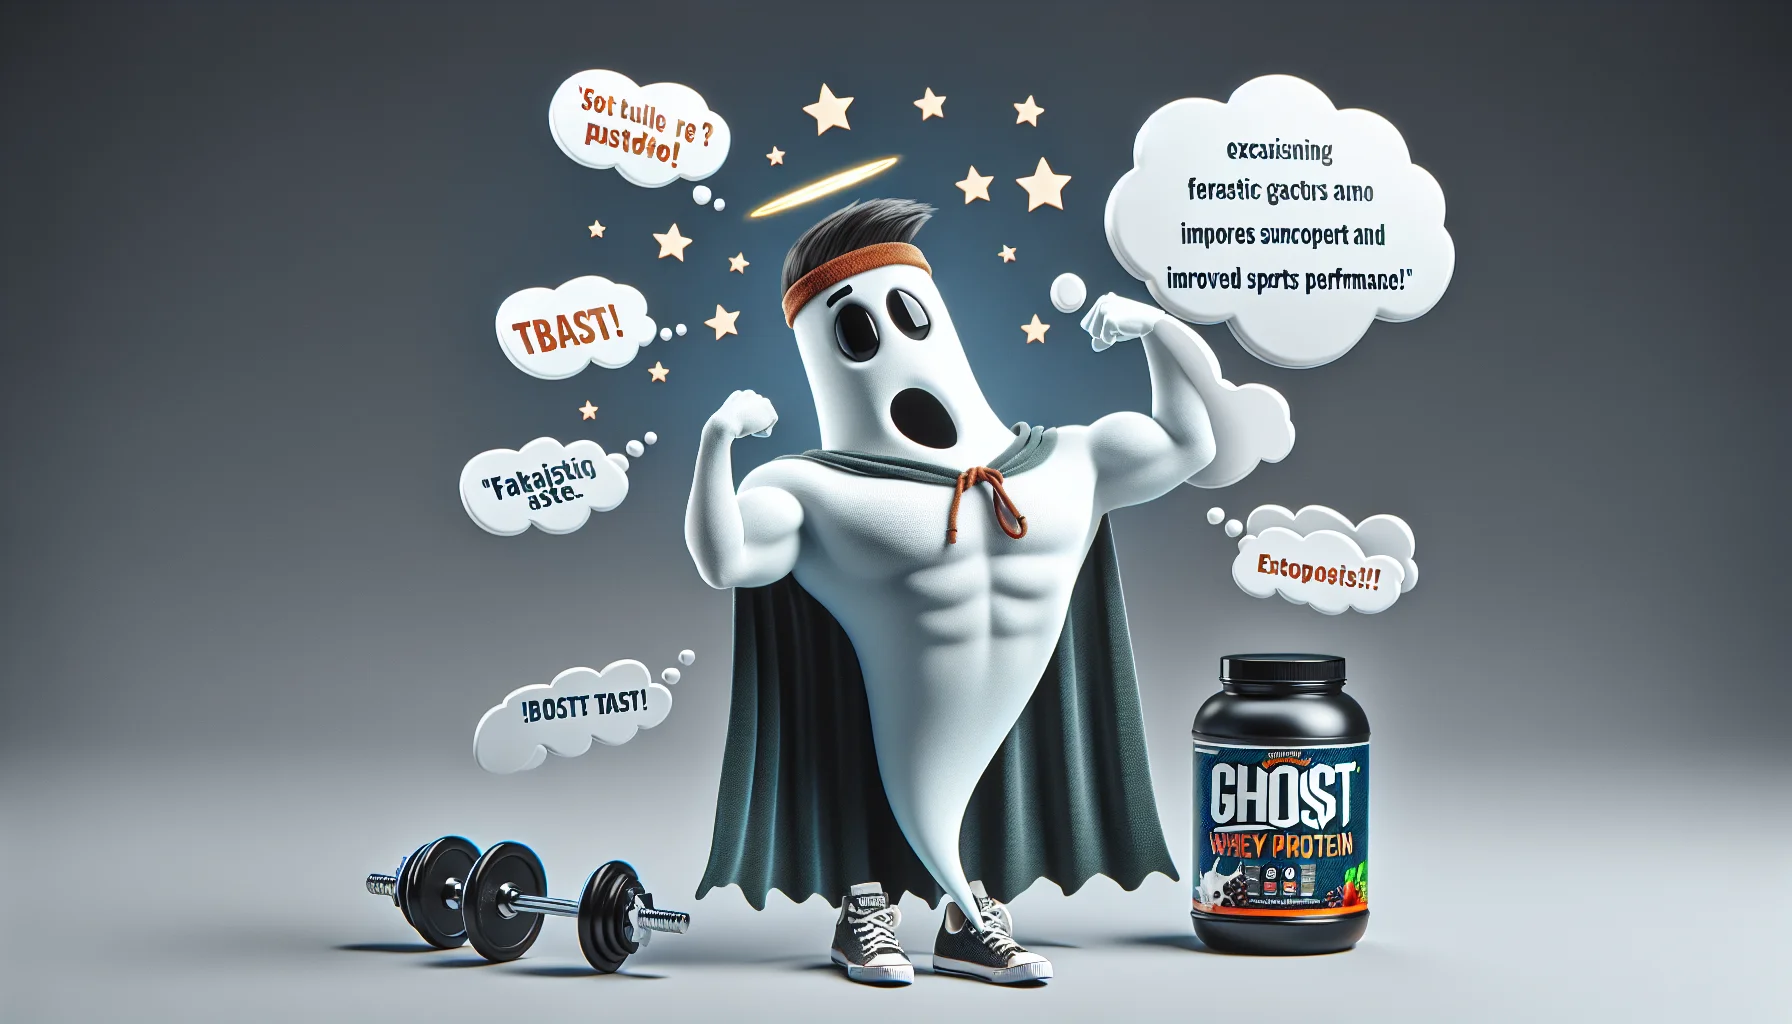 Craft a humor-filled scenario that portrays an imagined character providing a review for ghost whey protein. This lighthearted character could be personified as a friendly, energetic, cartoonish ghost who is outfitted in top-tier workout gear. They enthusiastically flex their spectral muscles while demonstrating a bemused excitement about the supplement. Display a thought bubble where the ghost is exclaiming about the fantastic taste and the improved sports performance it provides. Incorporate detailed imagery of the product package nearby, and perhaps a semi-transparent dumbbell in the ghost's other hand to indicate the sports context. This scenario is intended to promote the use of supplements in a fun, enticing way.